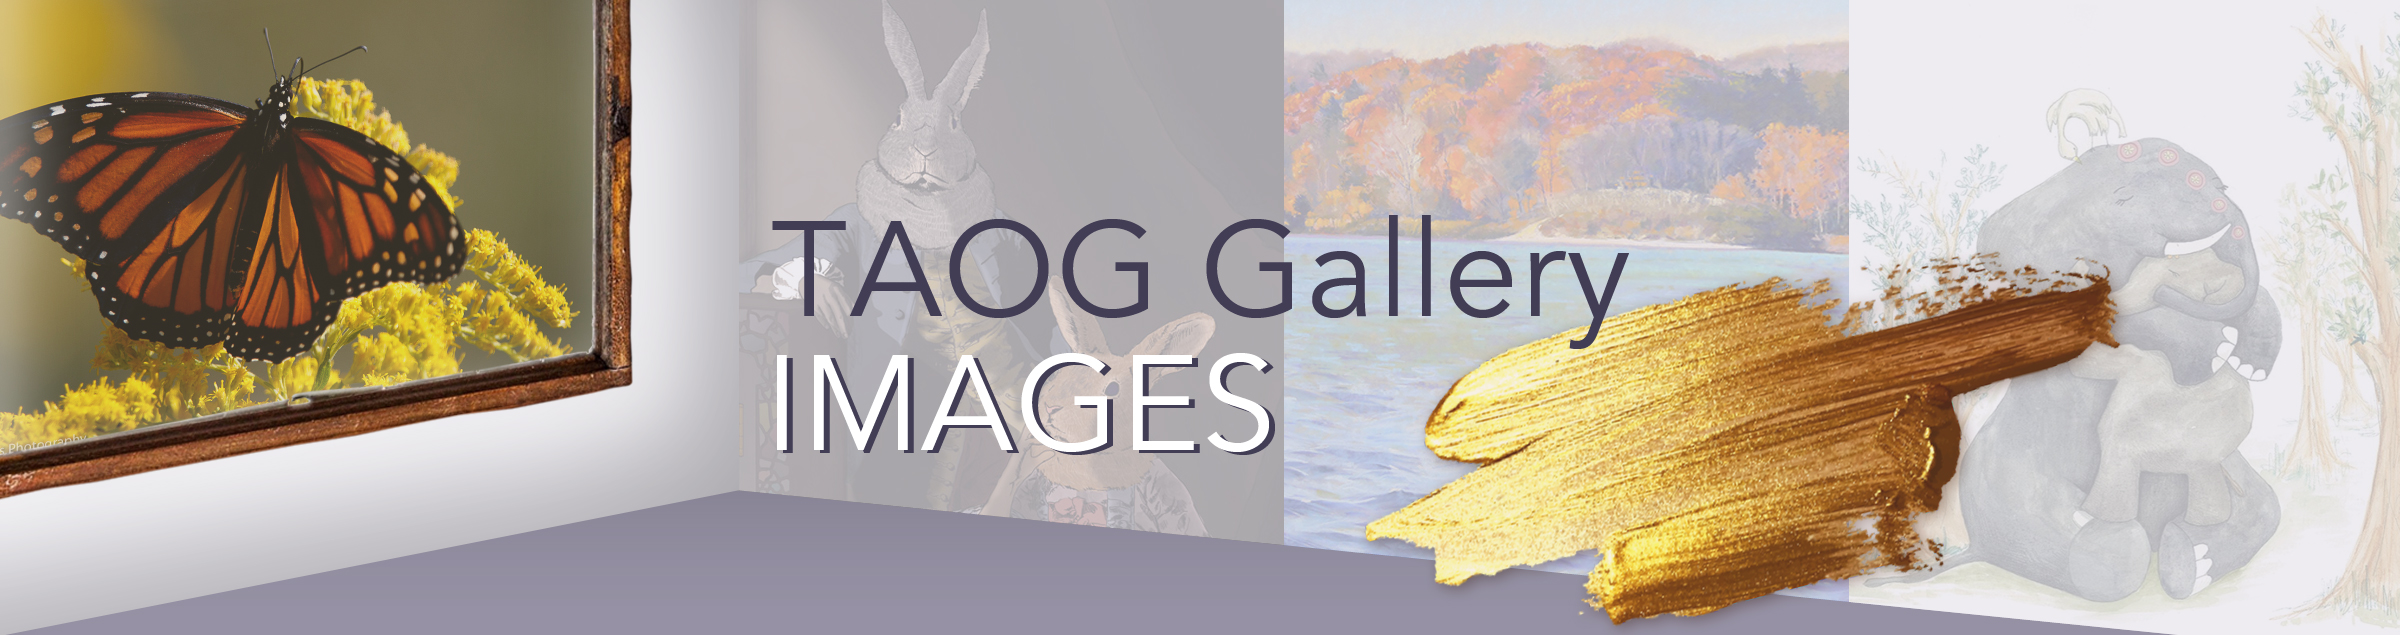 TAOG Gallery Images